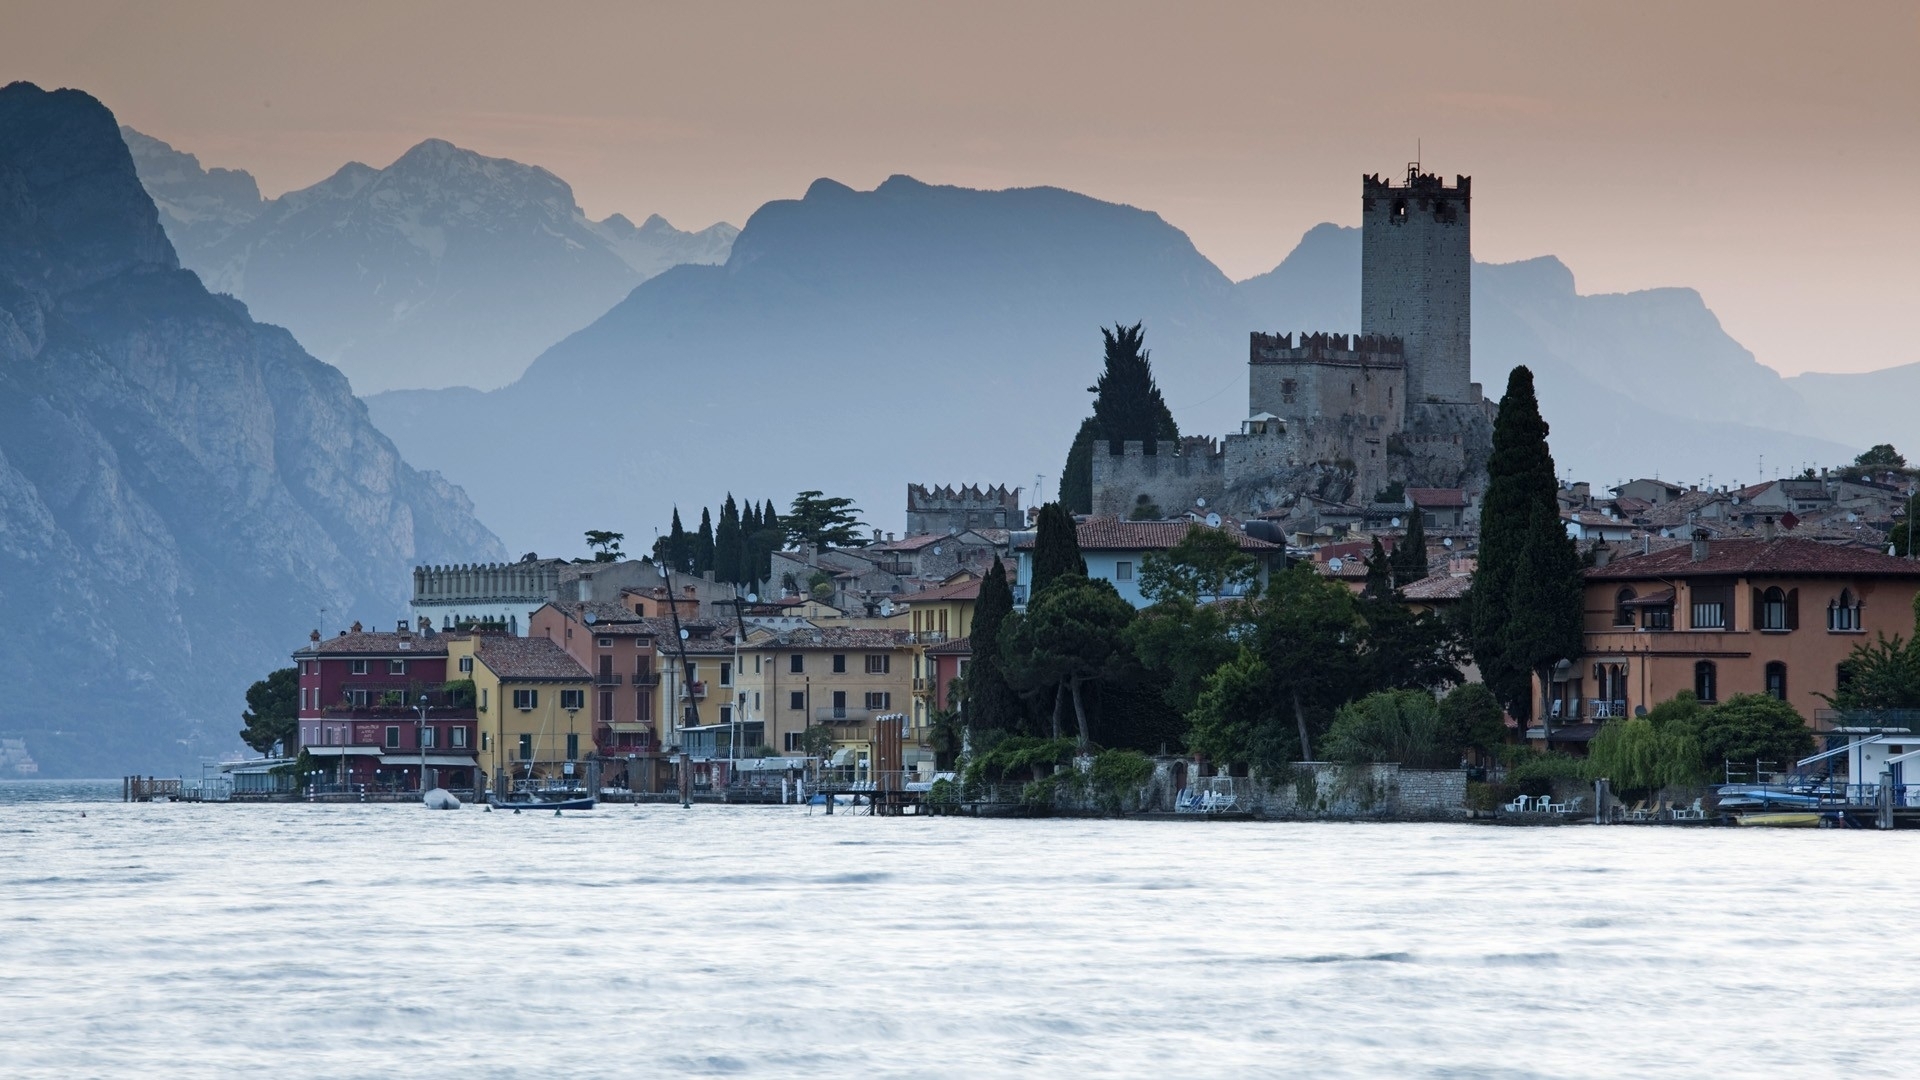 italy, Malcesine, Garda, World, Architecture, Buildings, Houses, Tower, Castle, Lakes, Water, Mountains, Scenic, Place Wallpaper